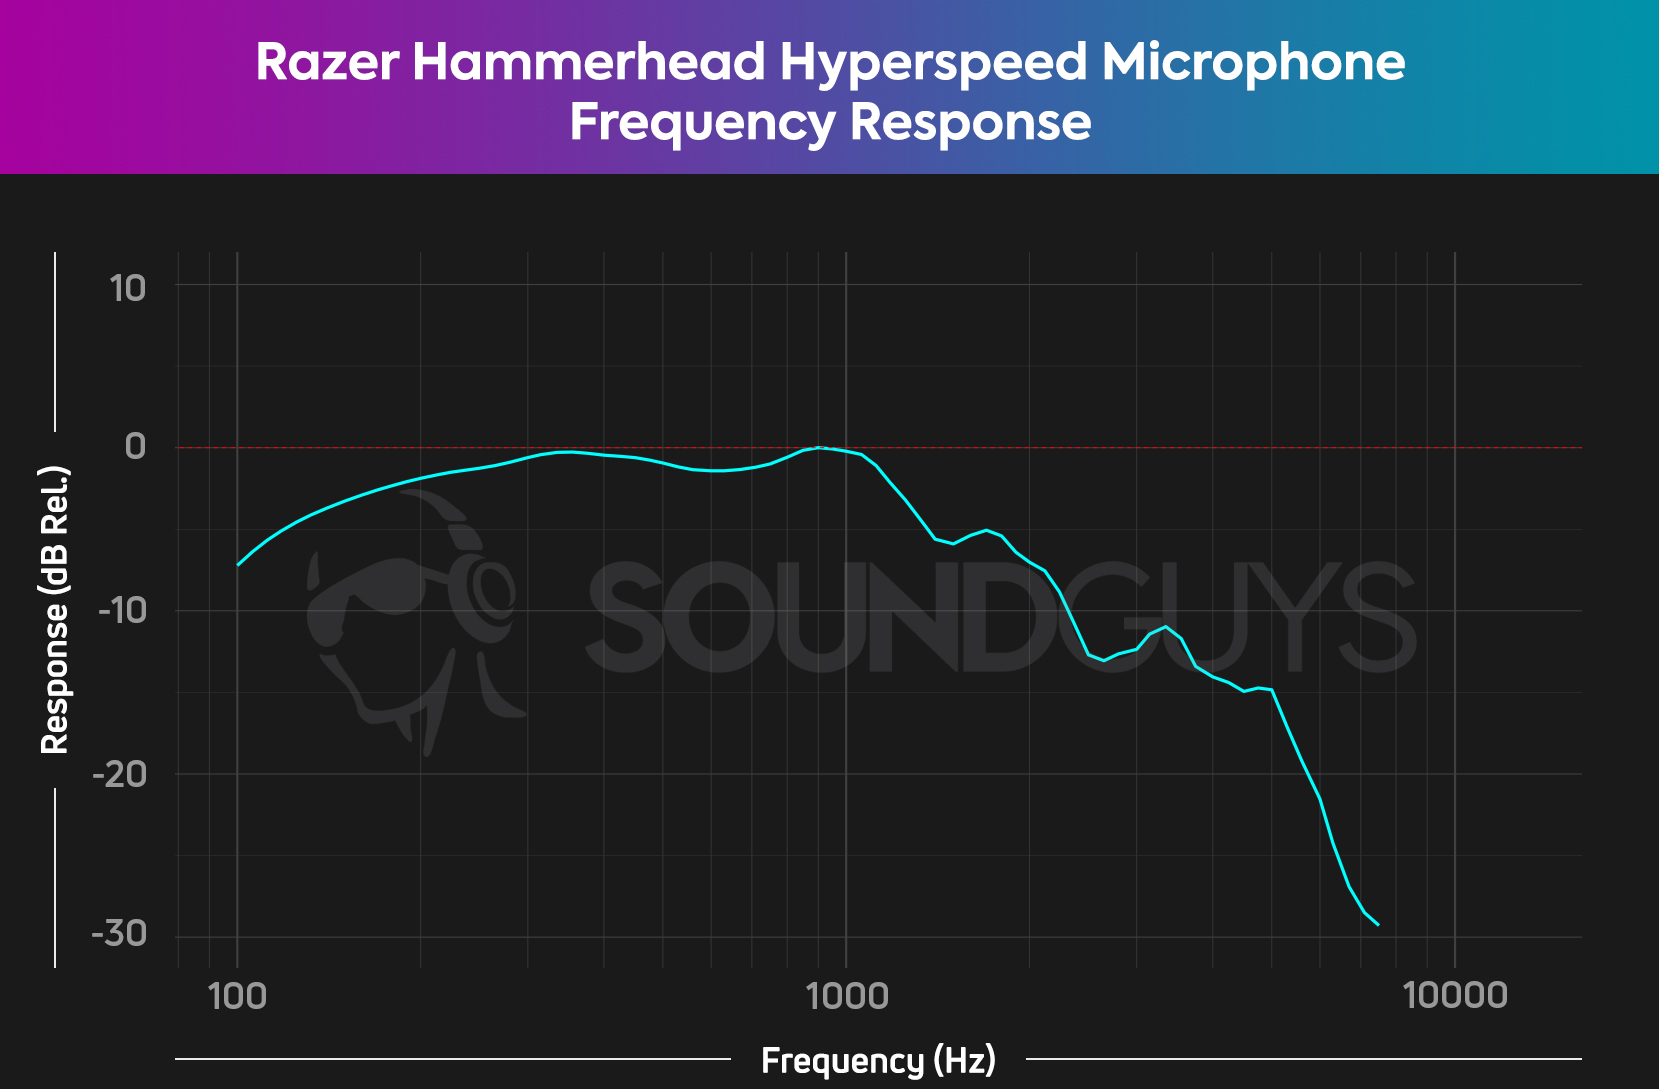 A frequency response chart for the Razer Hammerhead Hyperspeed microphone, which looks pretty typical output for this kind of mic.